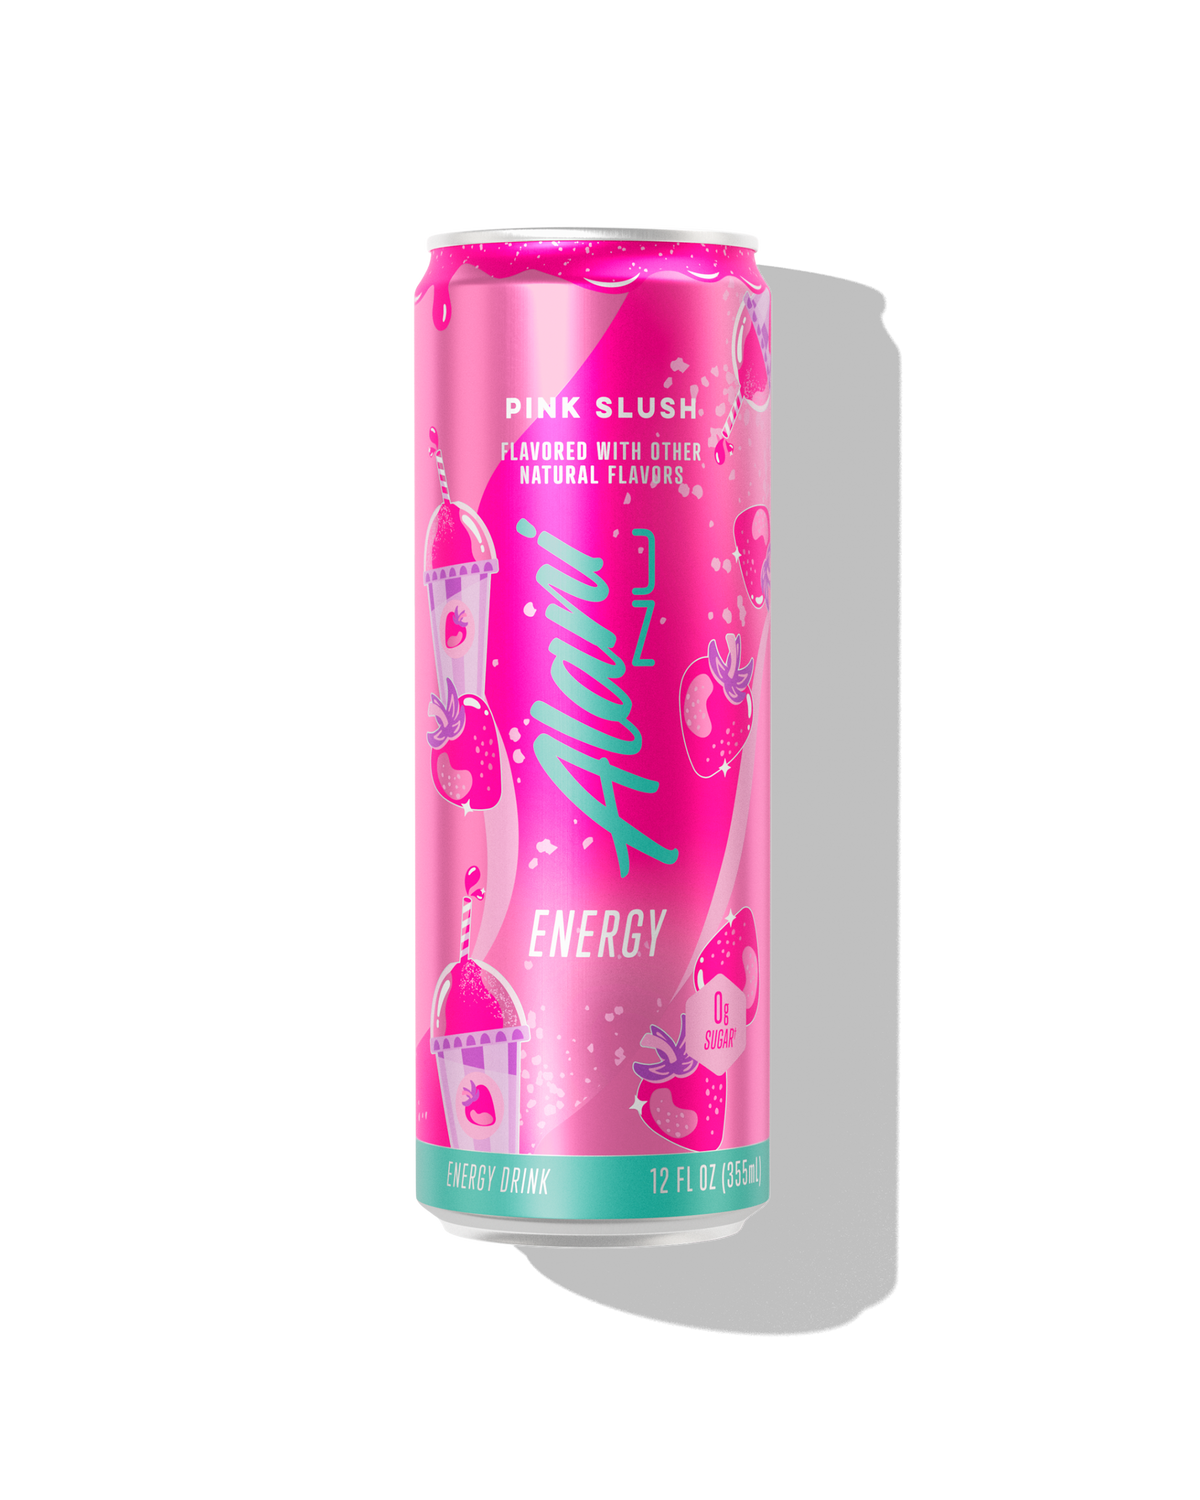 The front view of an Alani Nu Pink Slush Energy Drink can. The can has 	strawberry and pink slushie illustrations, along with a 0g sugar badge.  